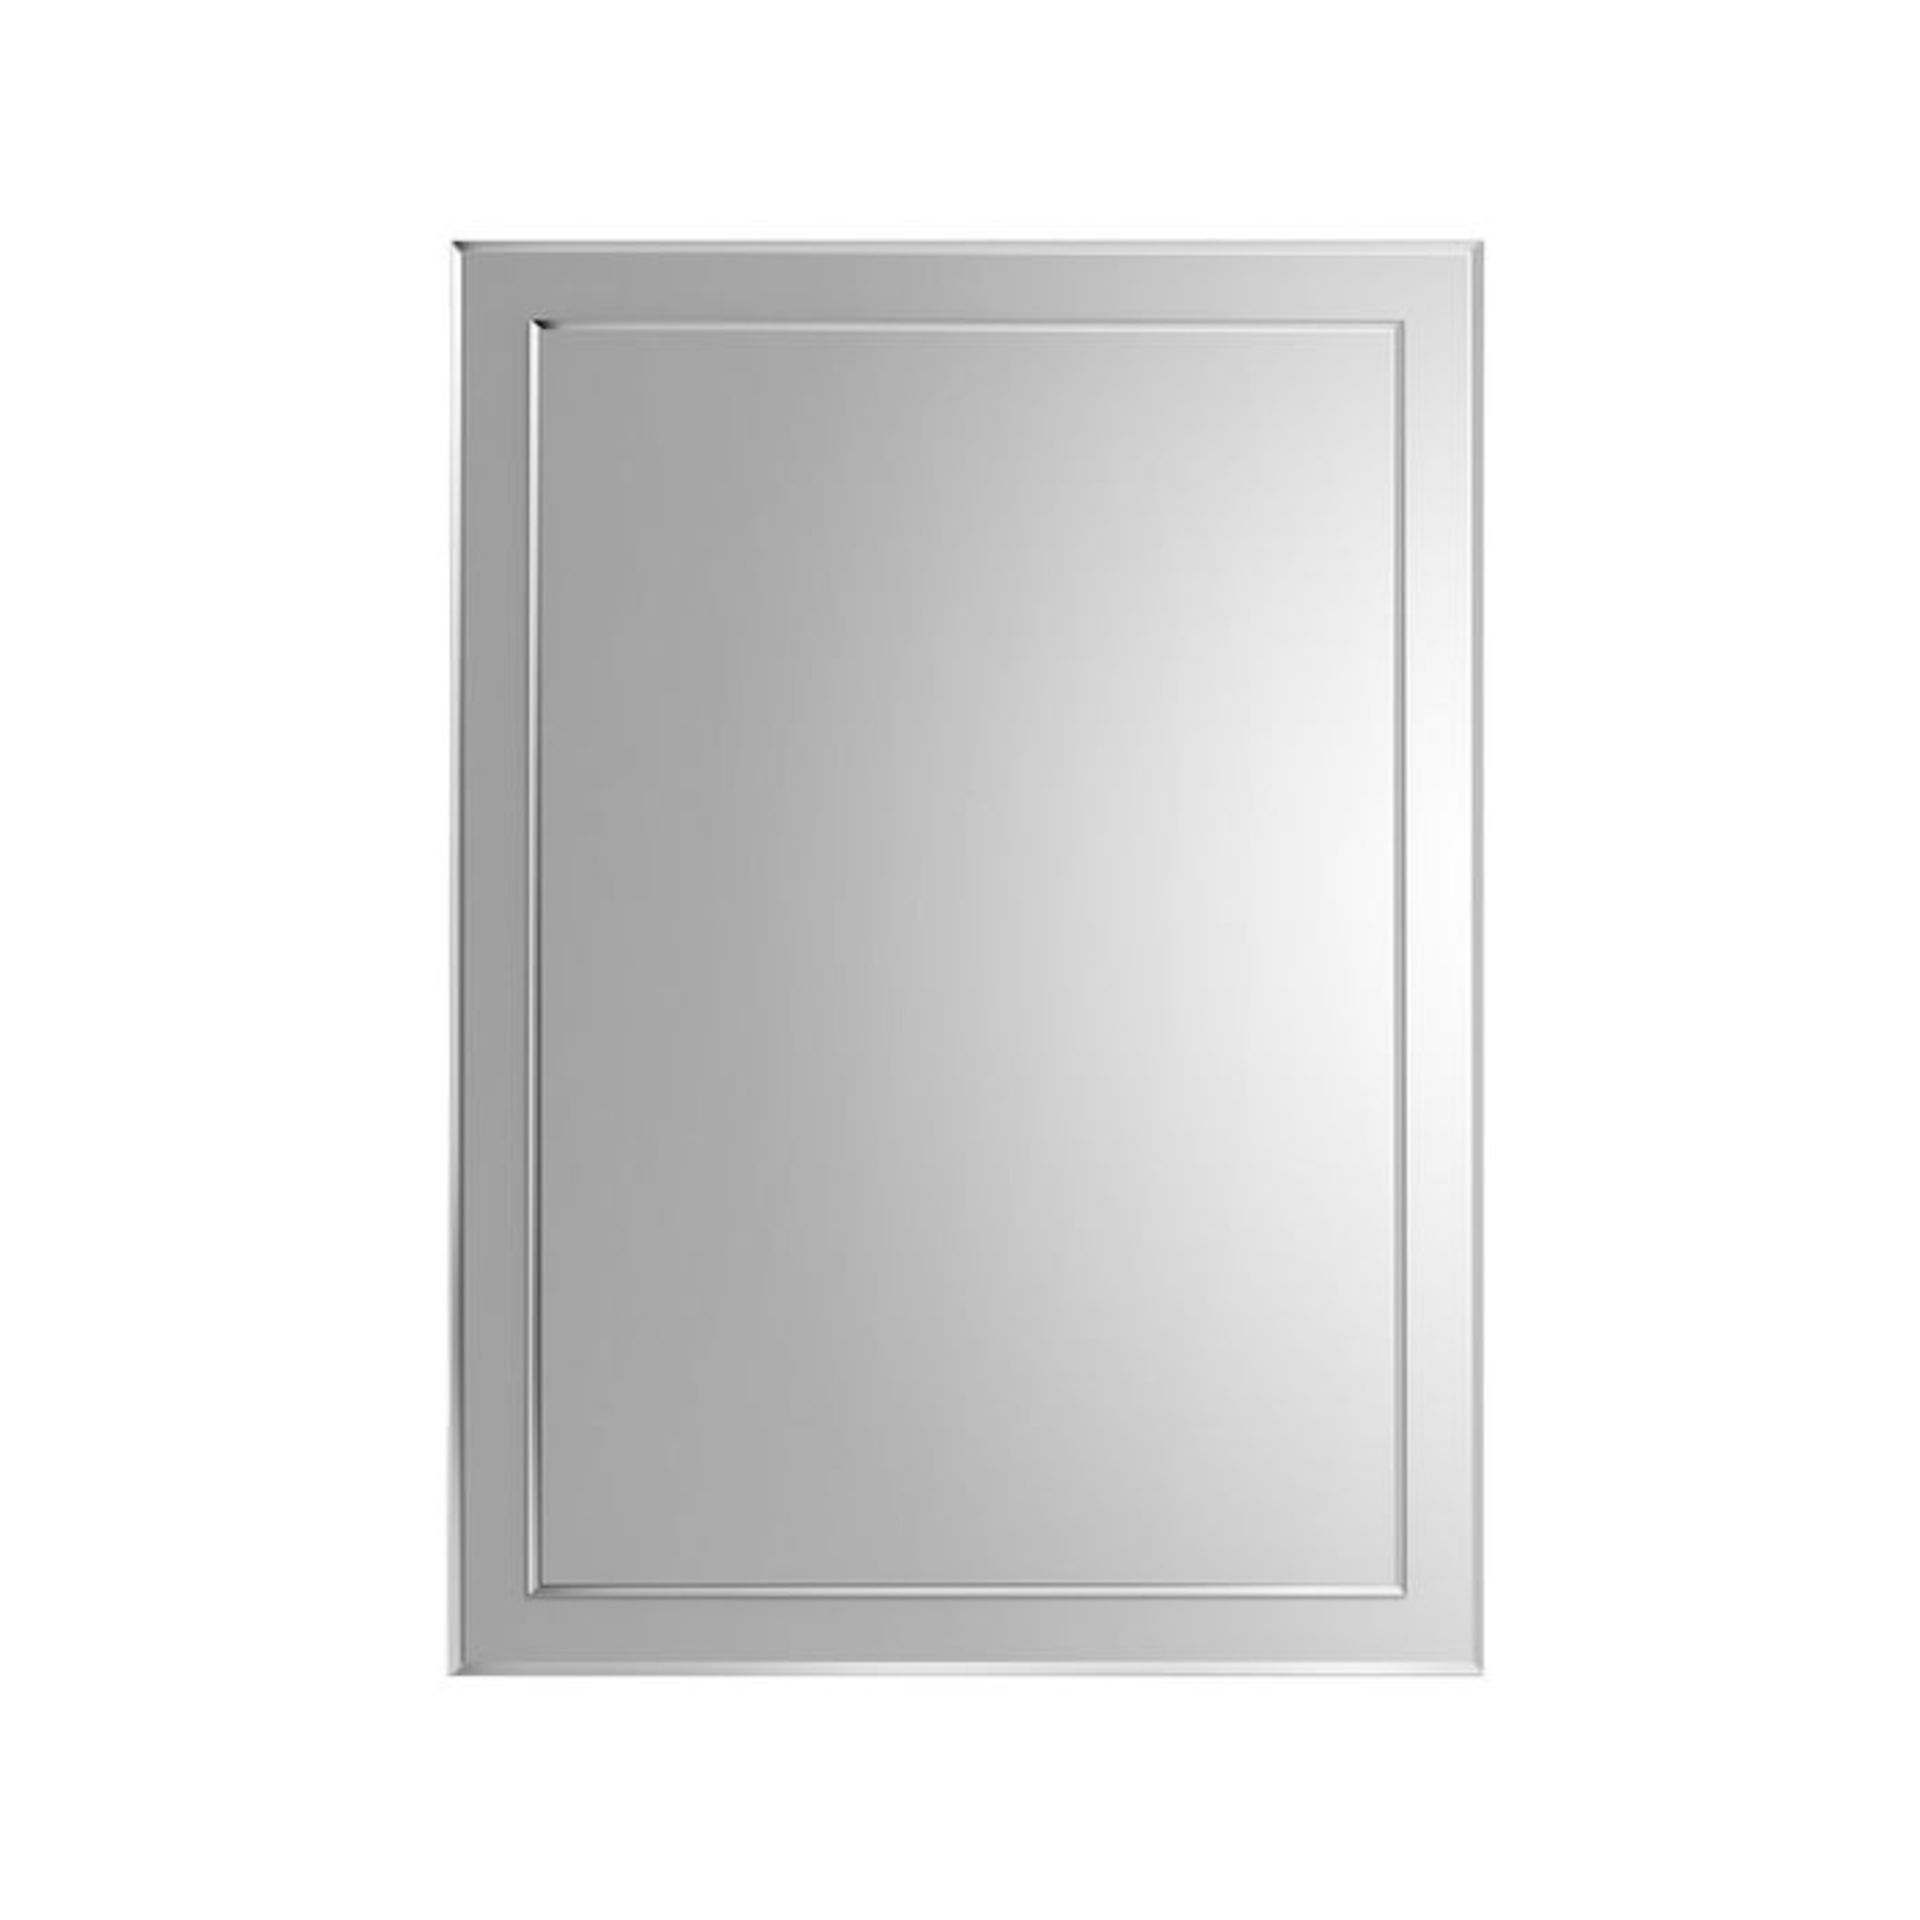 (ZL151) 650x900mm Bevel Mirror. RRP £89.00. Comes fully assembled for added convenience Versatile - Image 2 of 2